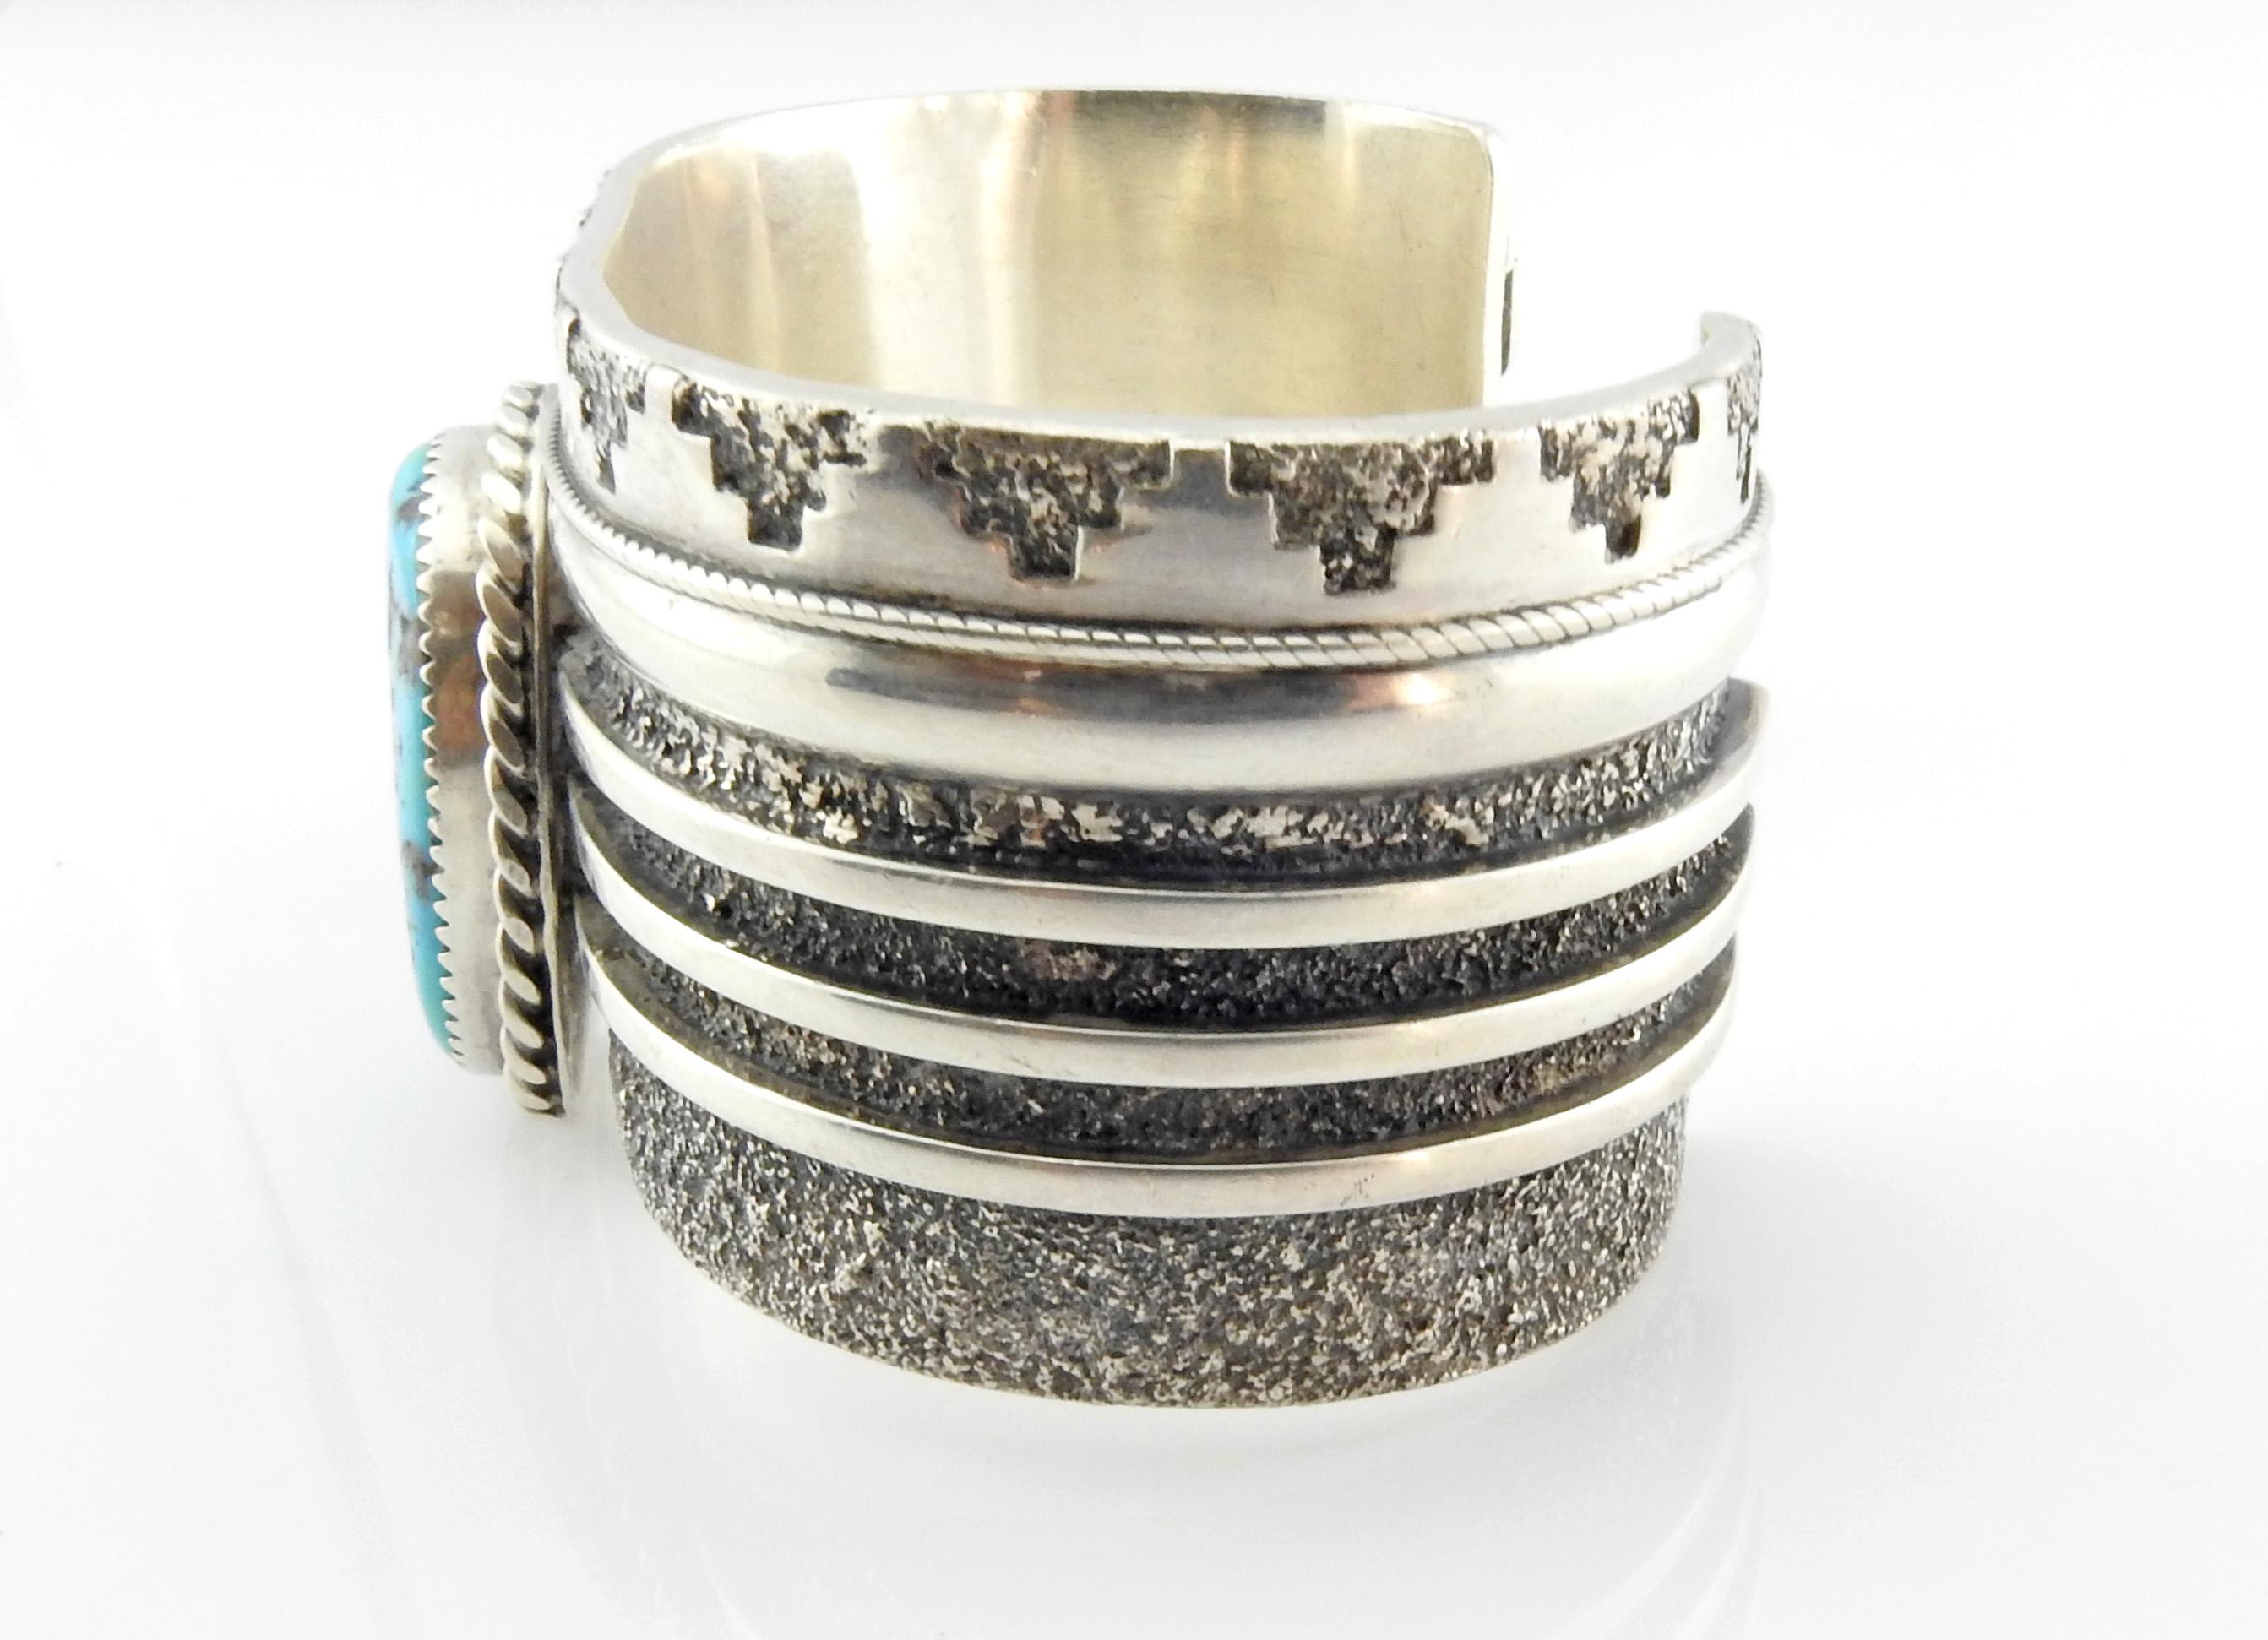 Native American Navajo L. Begay sterling silver turquoise stamped and textured cuff bracelet.

Marked: Sterling, L.Begay

Measures: 5 5/8